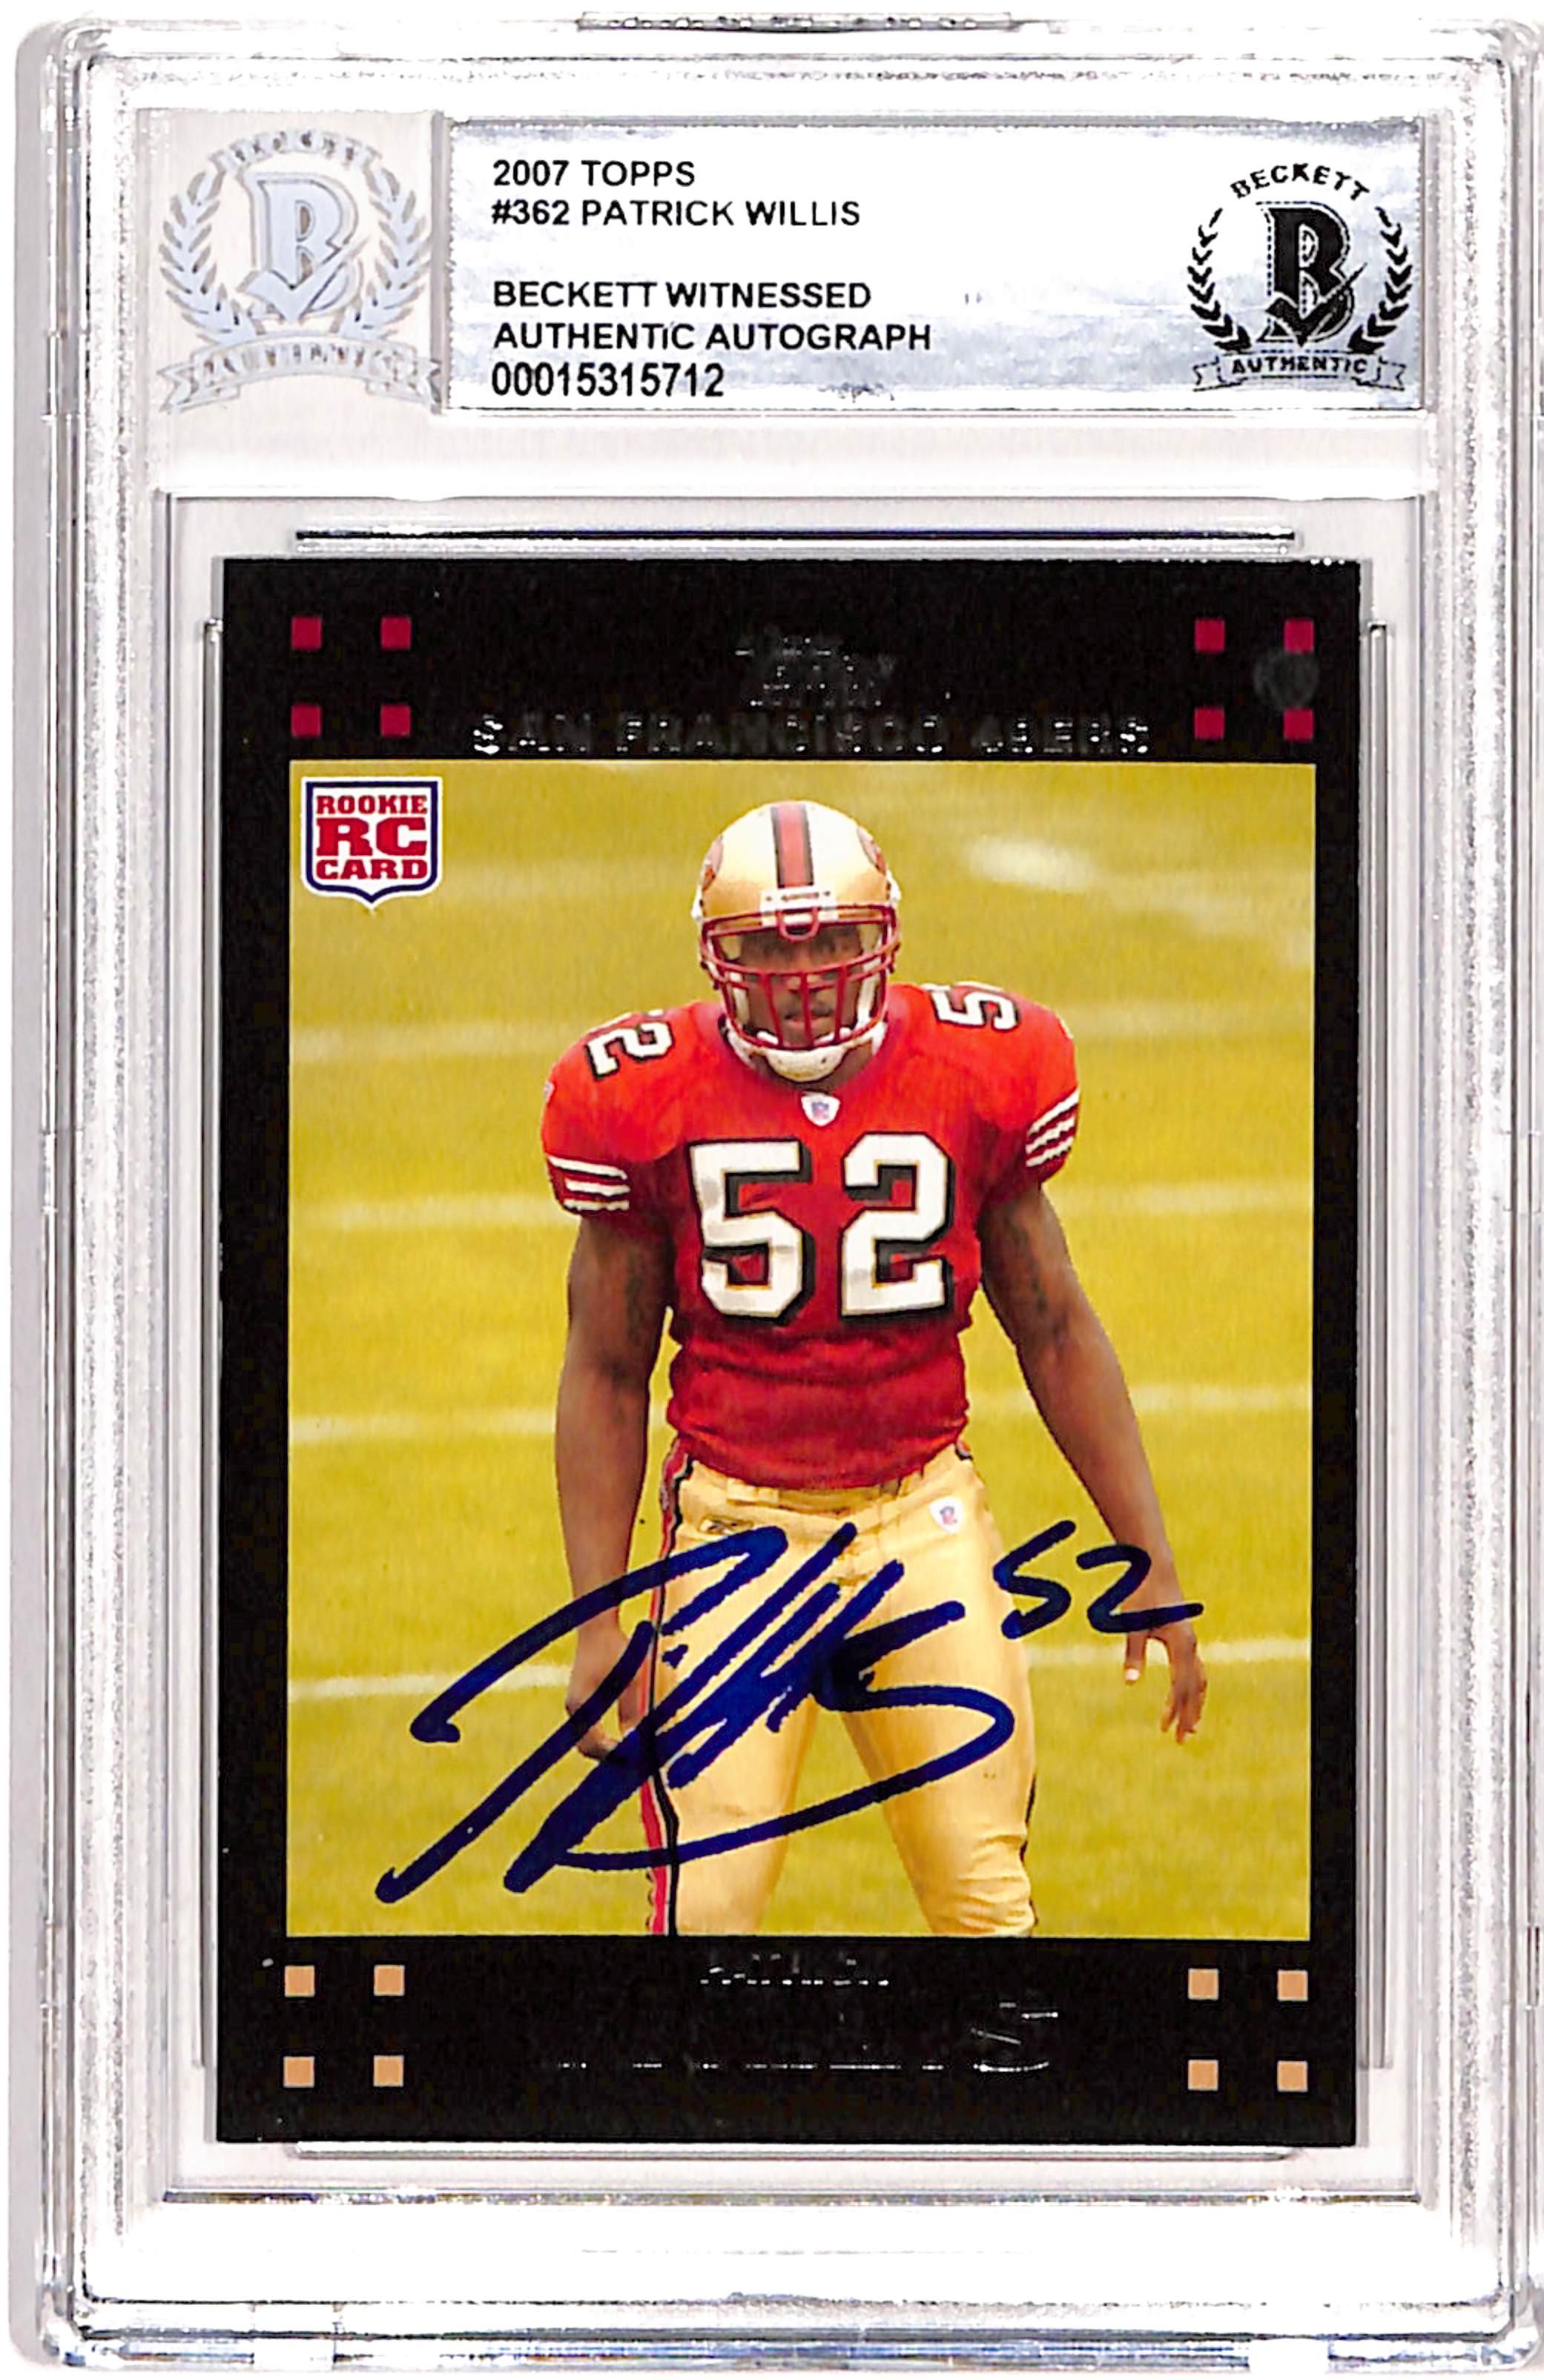 Patrick Willis Autographed/Signed 2007 Topps #362 Card Beckett